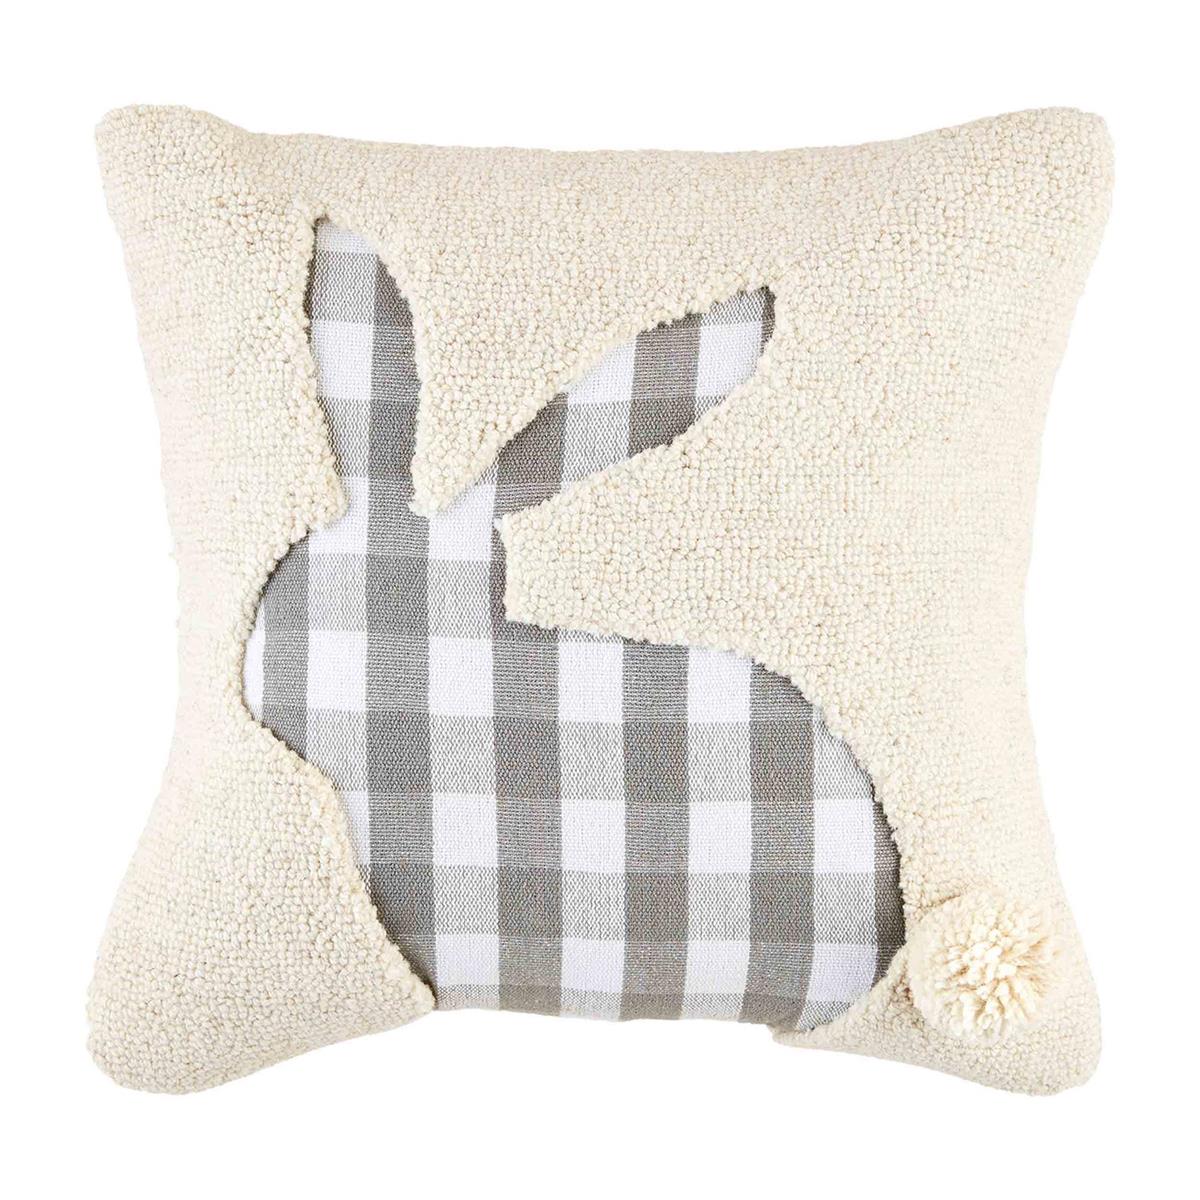 Recessed Check Bunny Hook Pillow